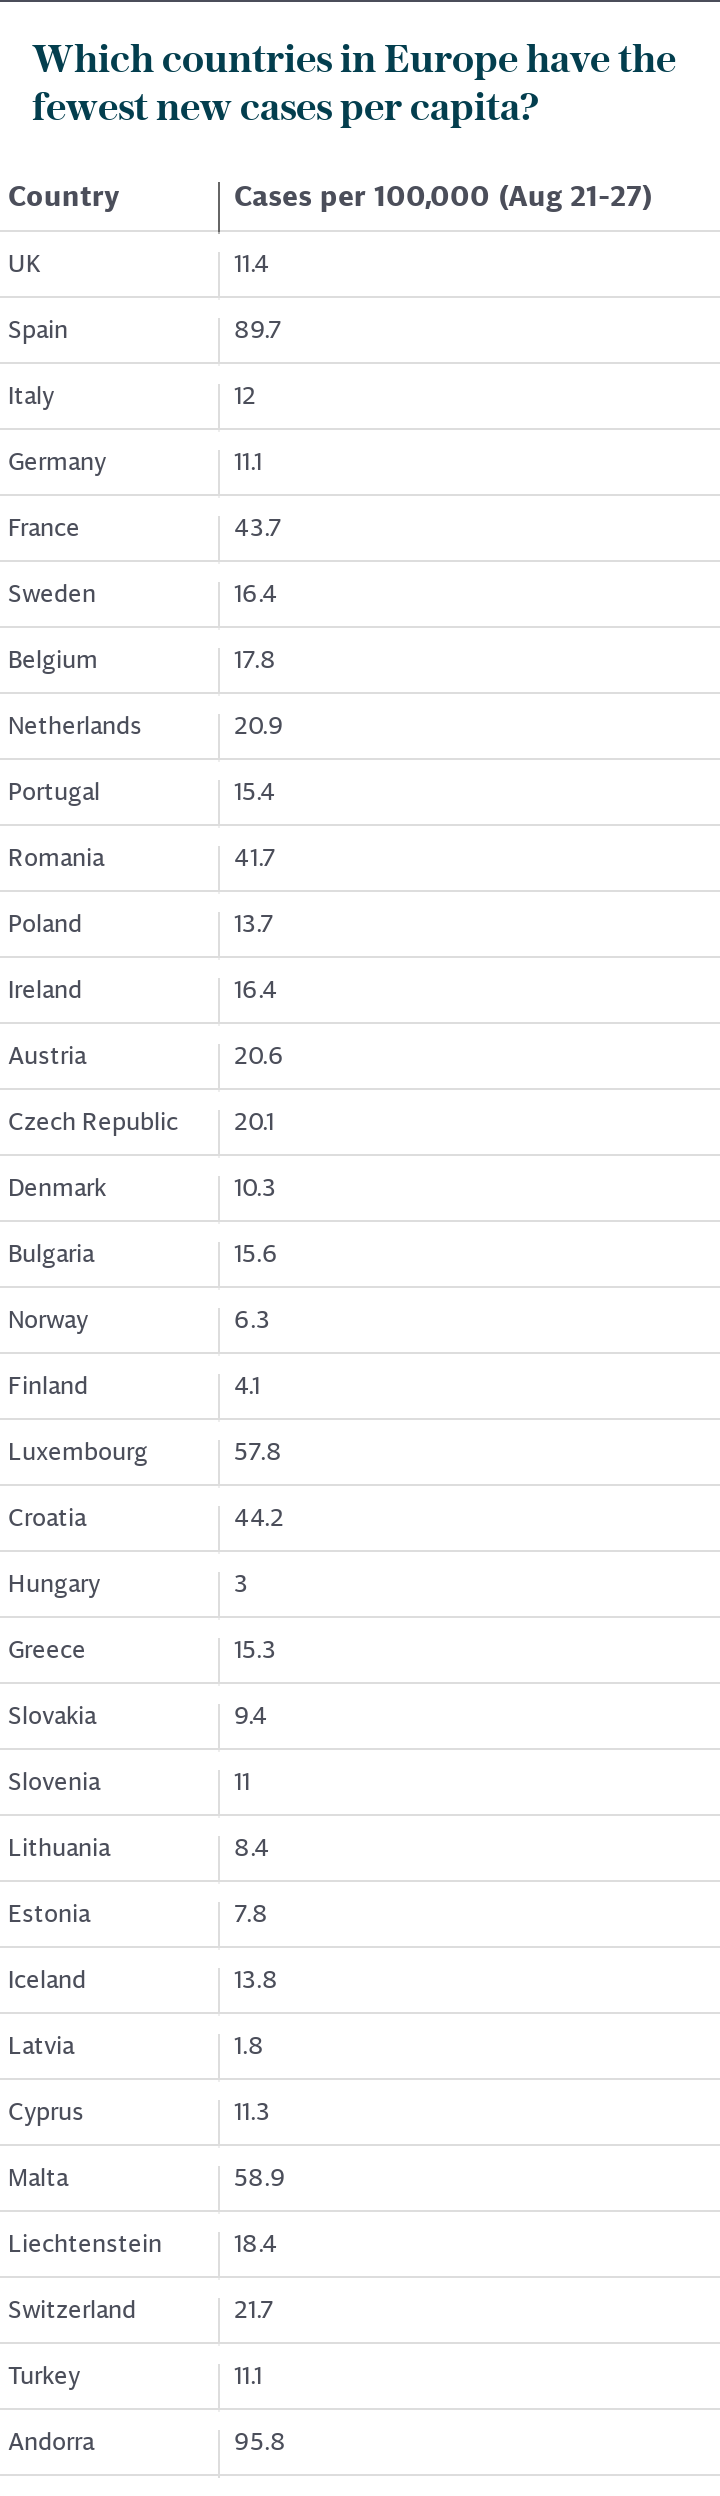 Which countries in Europe have the fewest new cases per capita?